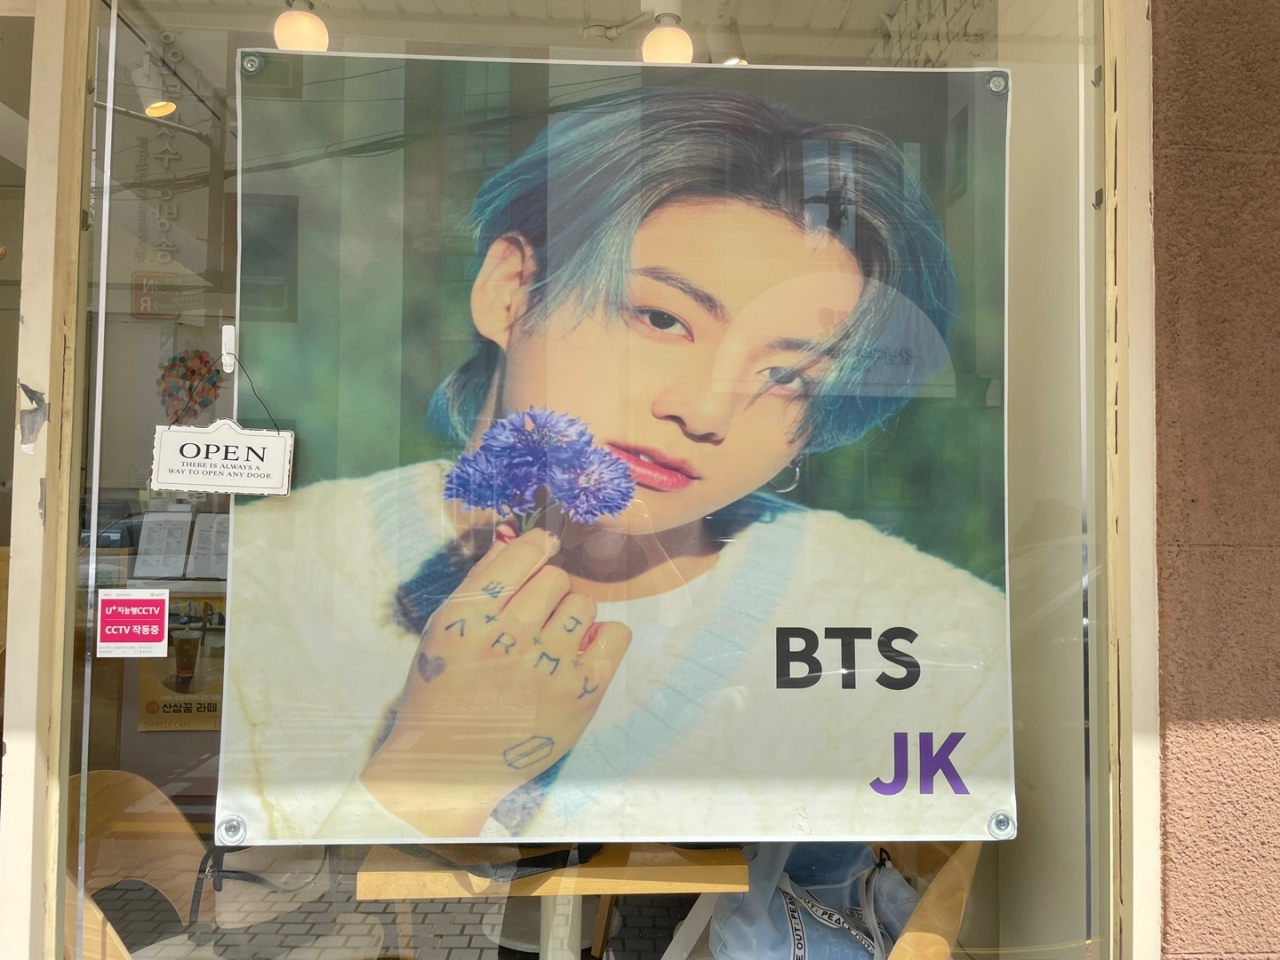 A hanging banner of Jung-kook’s photoshoot is displayed at the entrance to welcome fans. (Kweon Ha-bin/The Korea Herald)